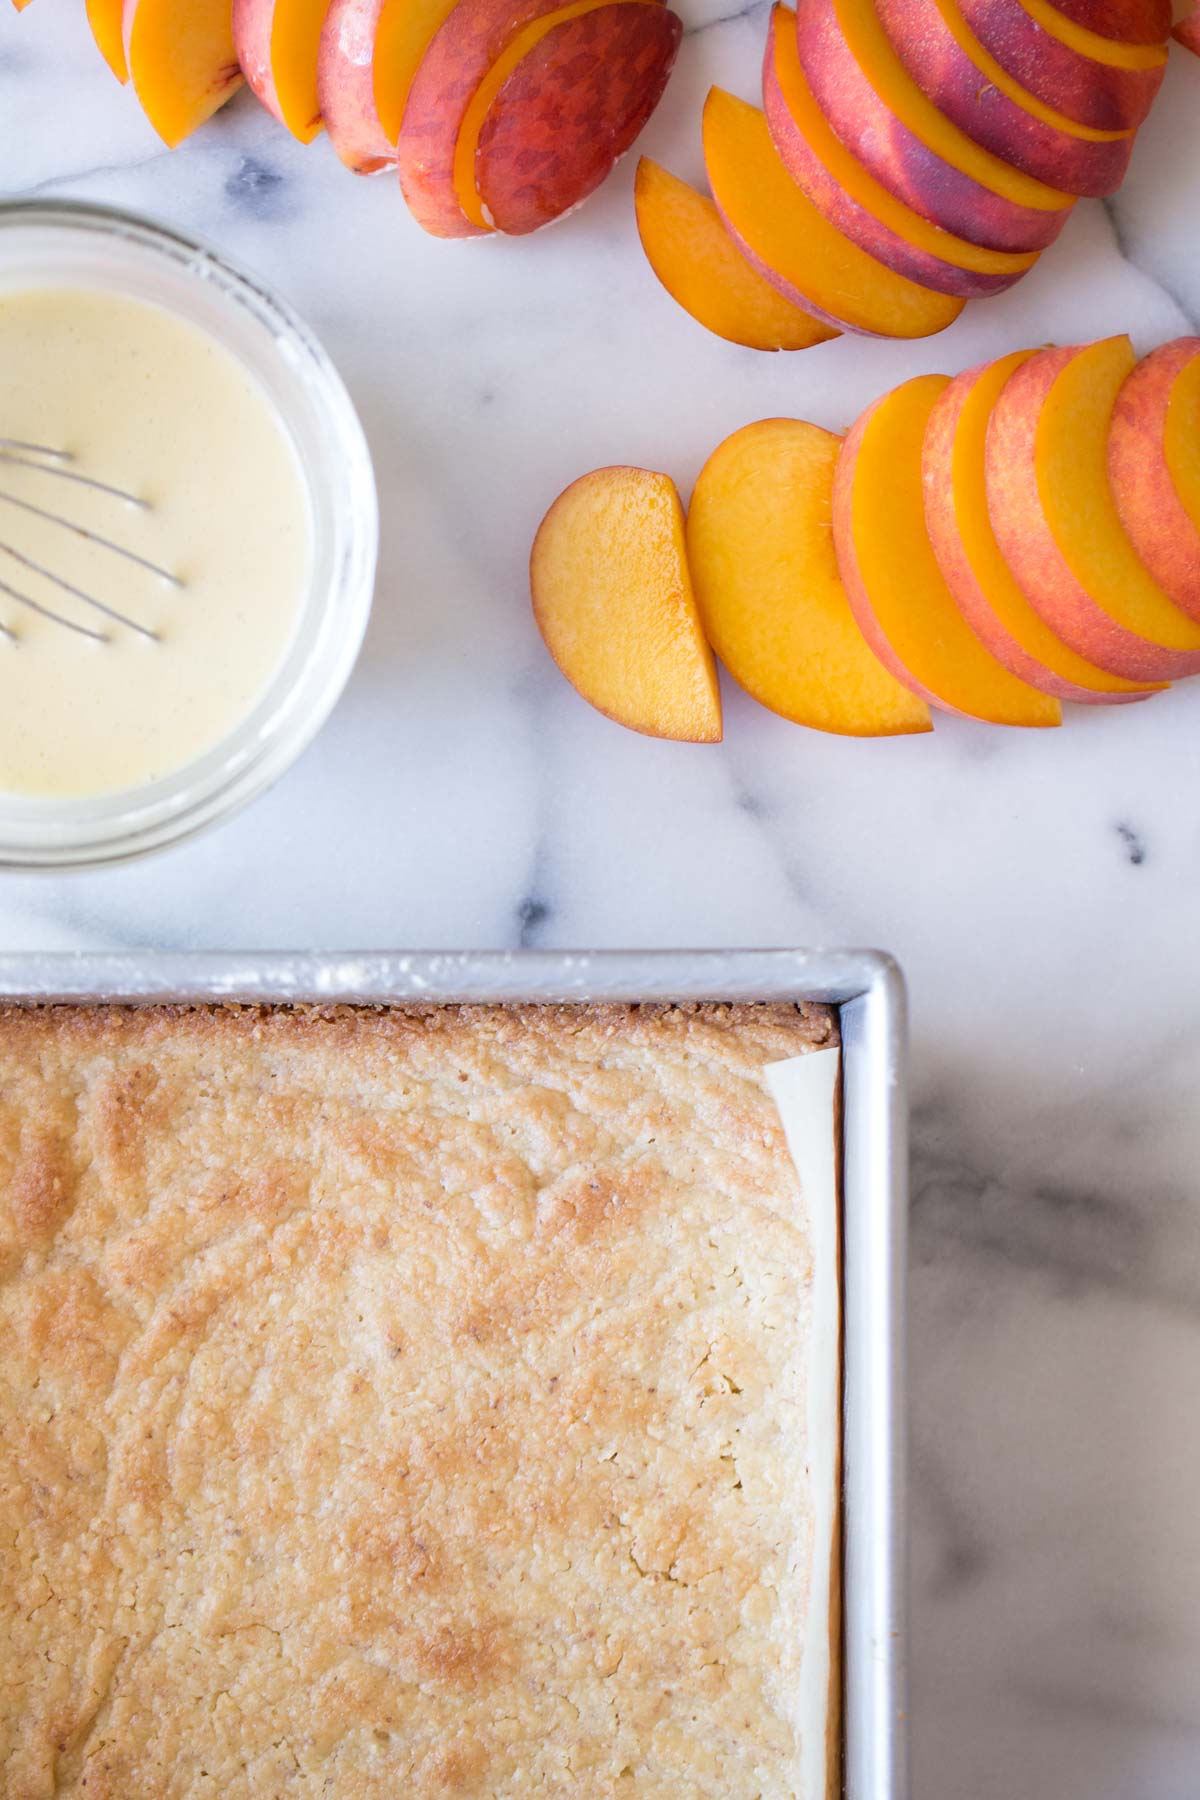 Almond shortbread crust in a baking dish, with some sliced fresh peaches and a bowl of creamy vanilla custard sitting next to it.  